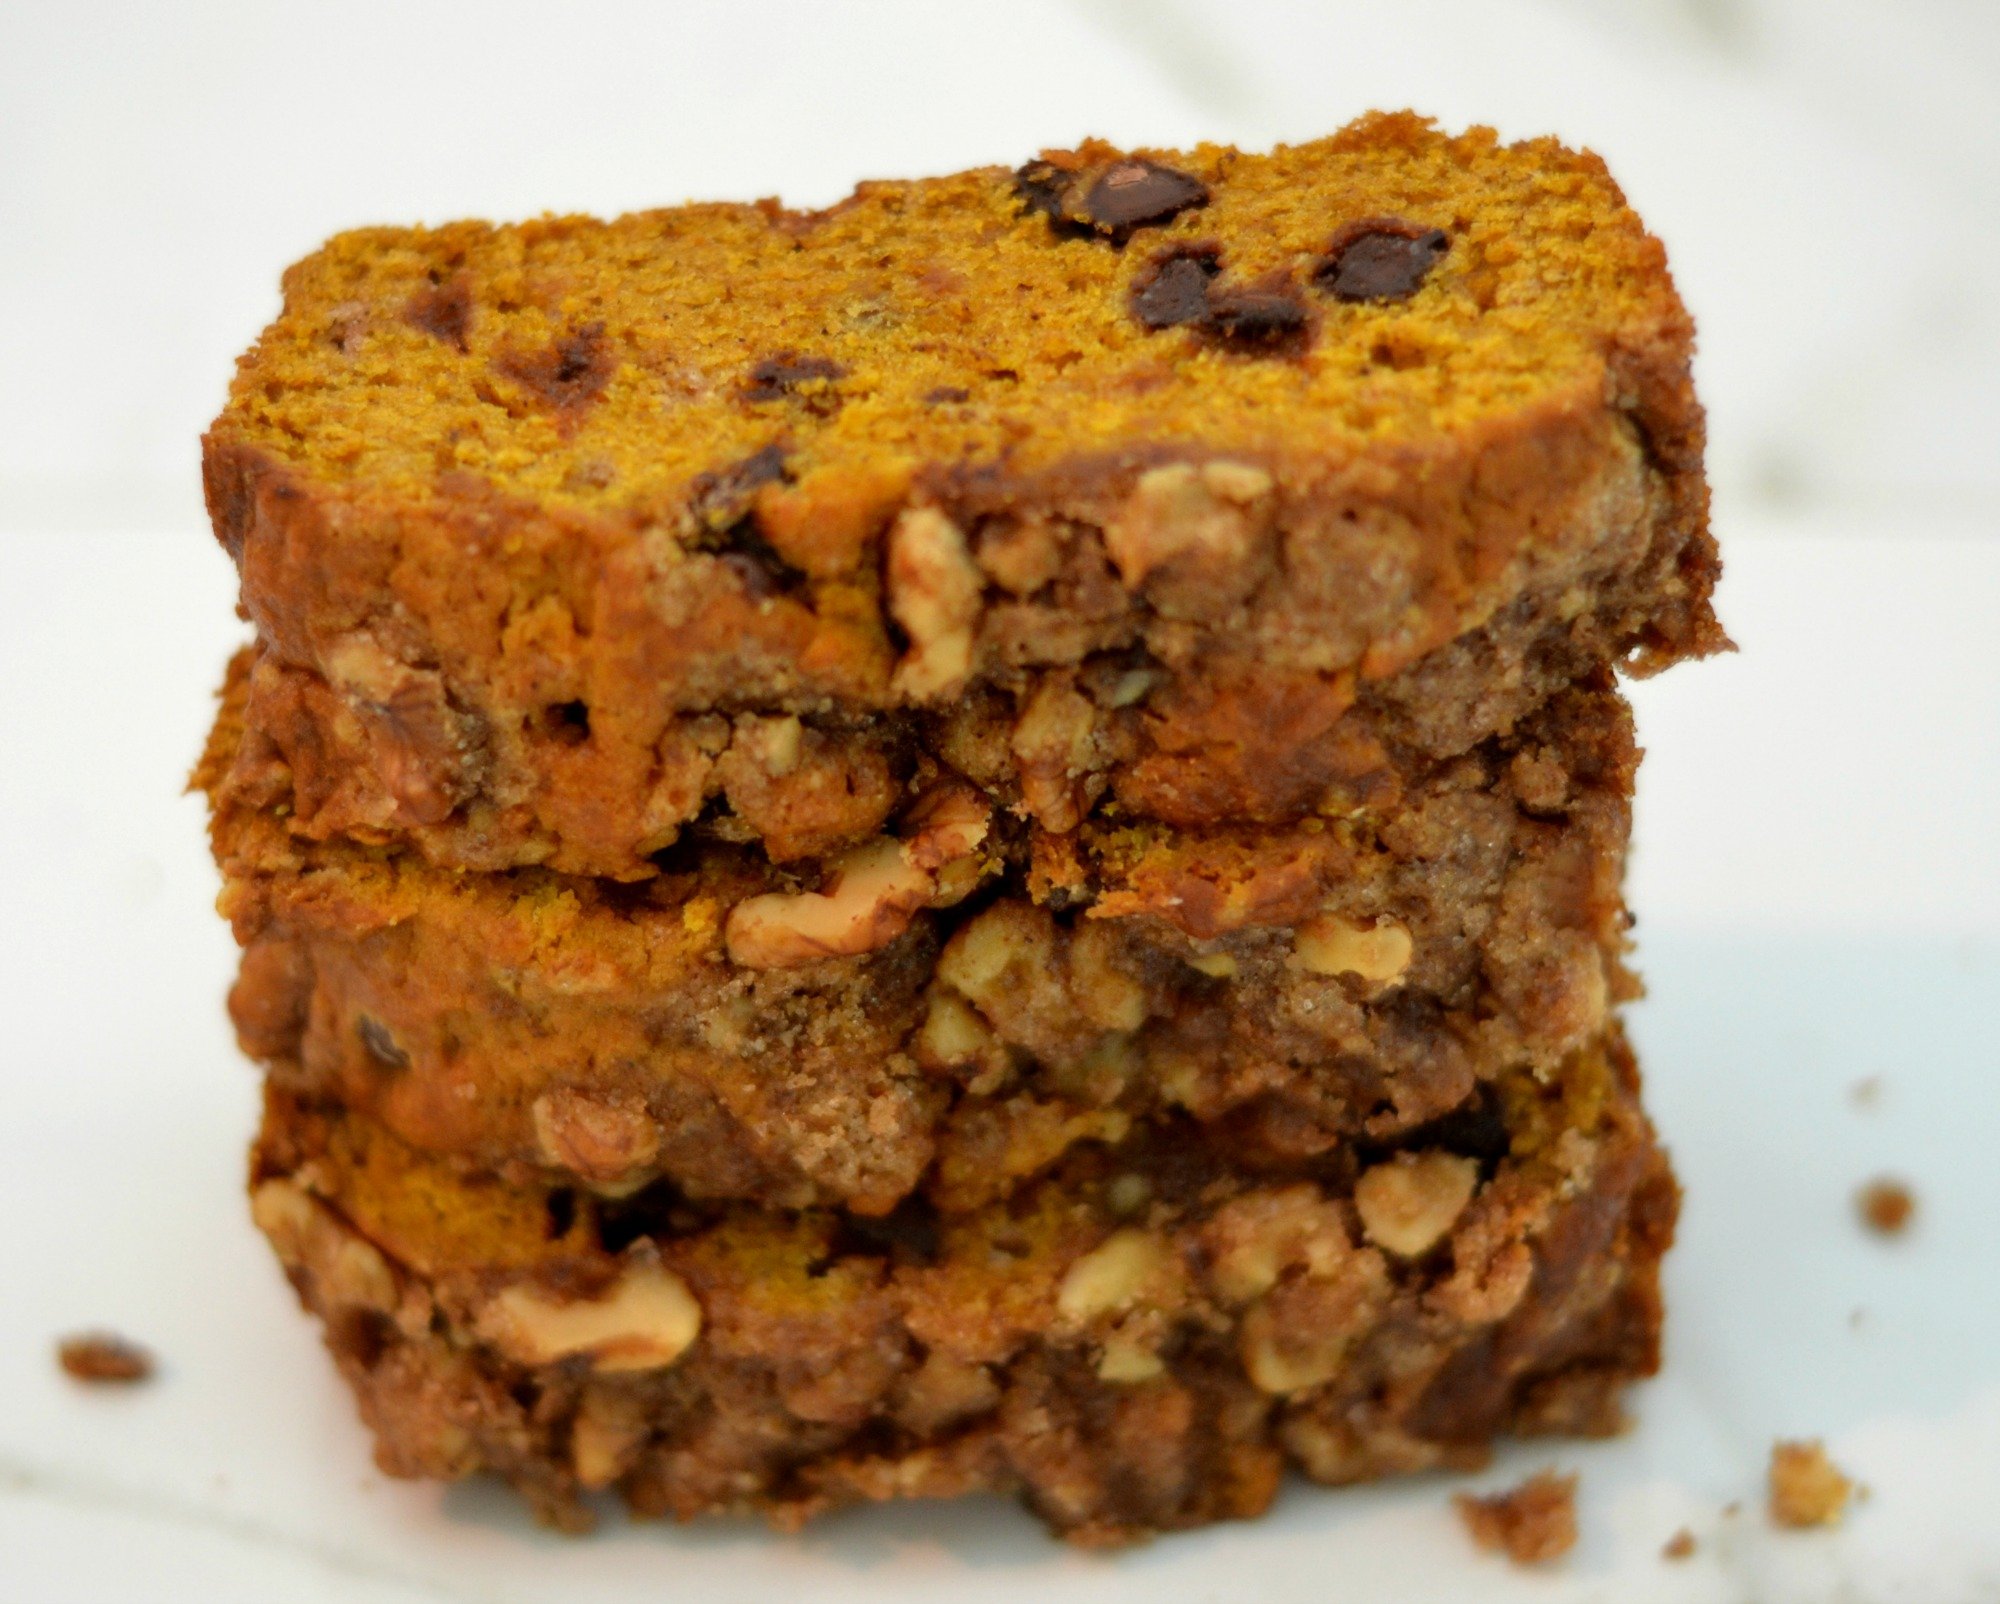 Chocolate Chip Pumpkin Bread| My basic pumpkin bread recipe with added chocolate and a special topping. So good! | www.thesurferskitchen.com